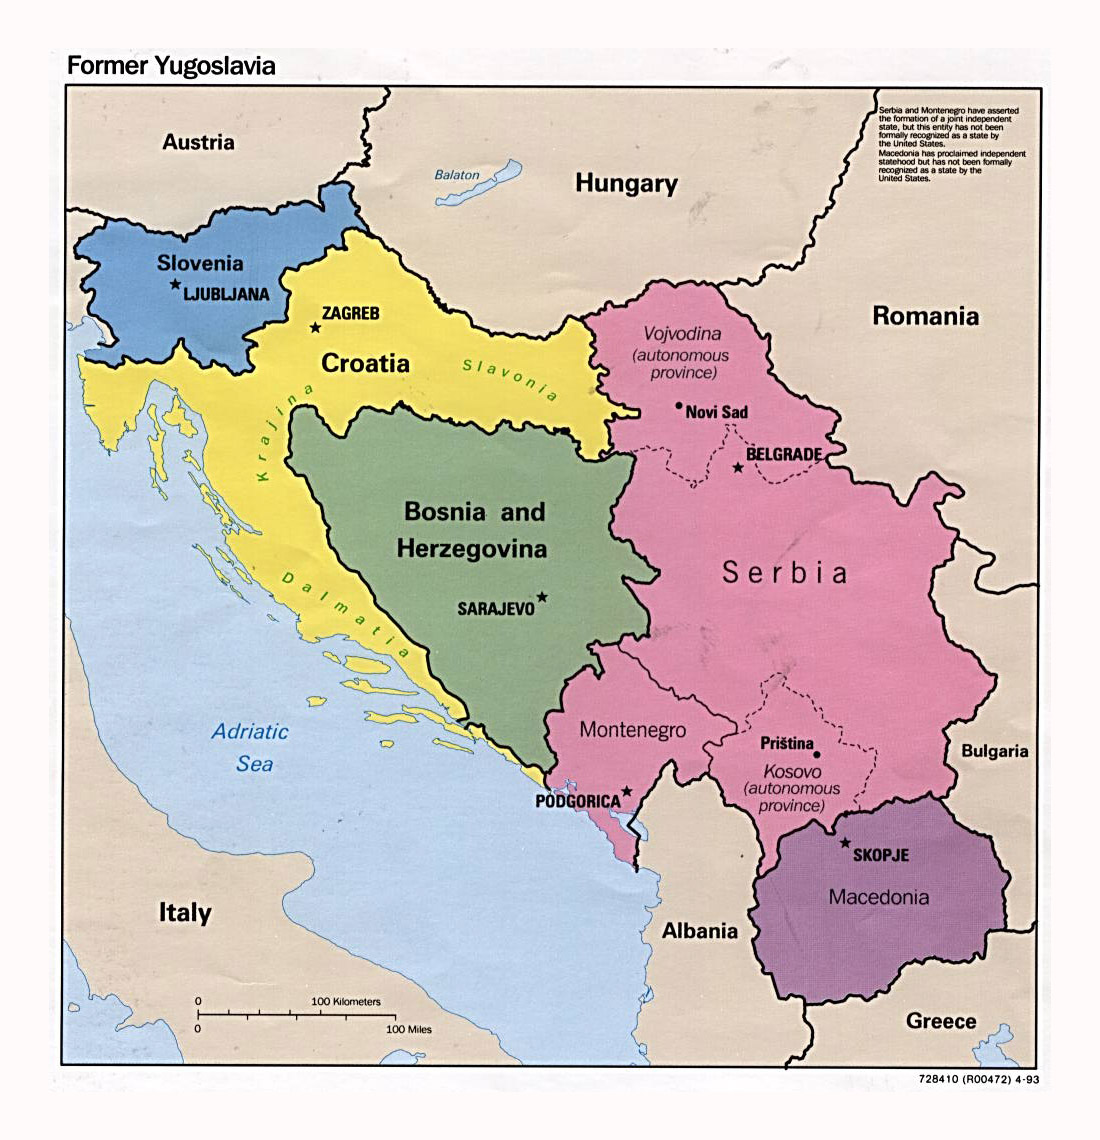 detailed-political-map-of-the-former-yugoslavia-1983